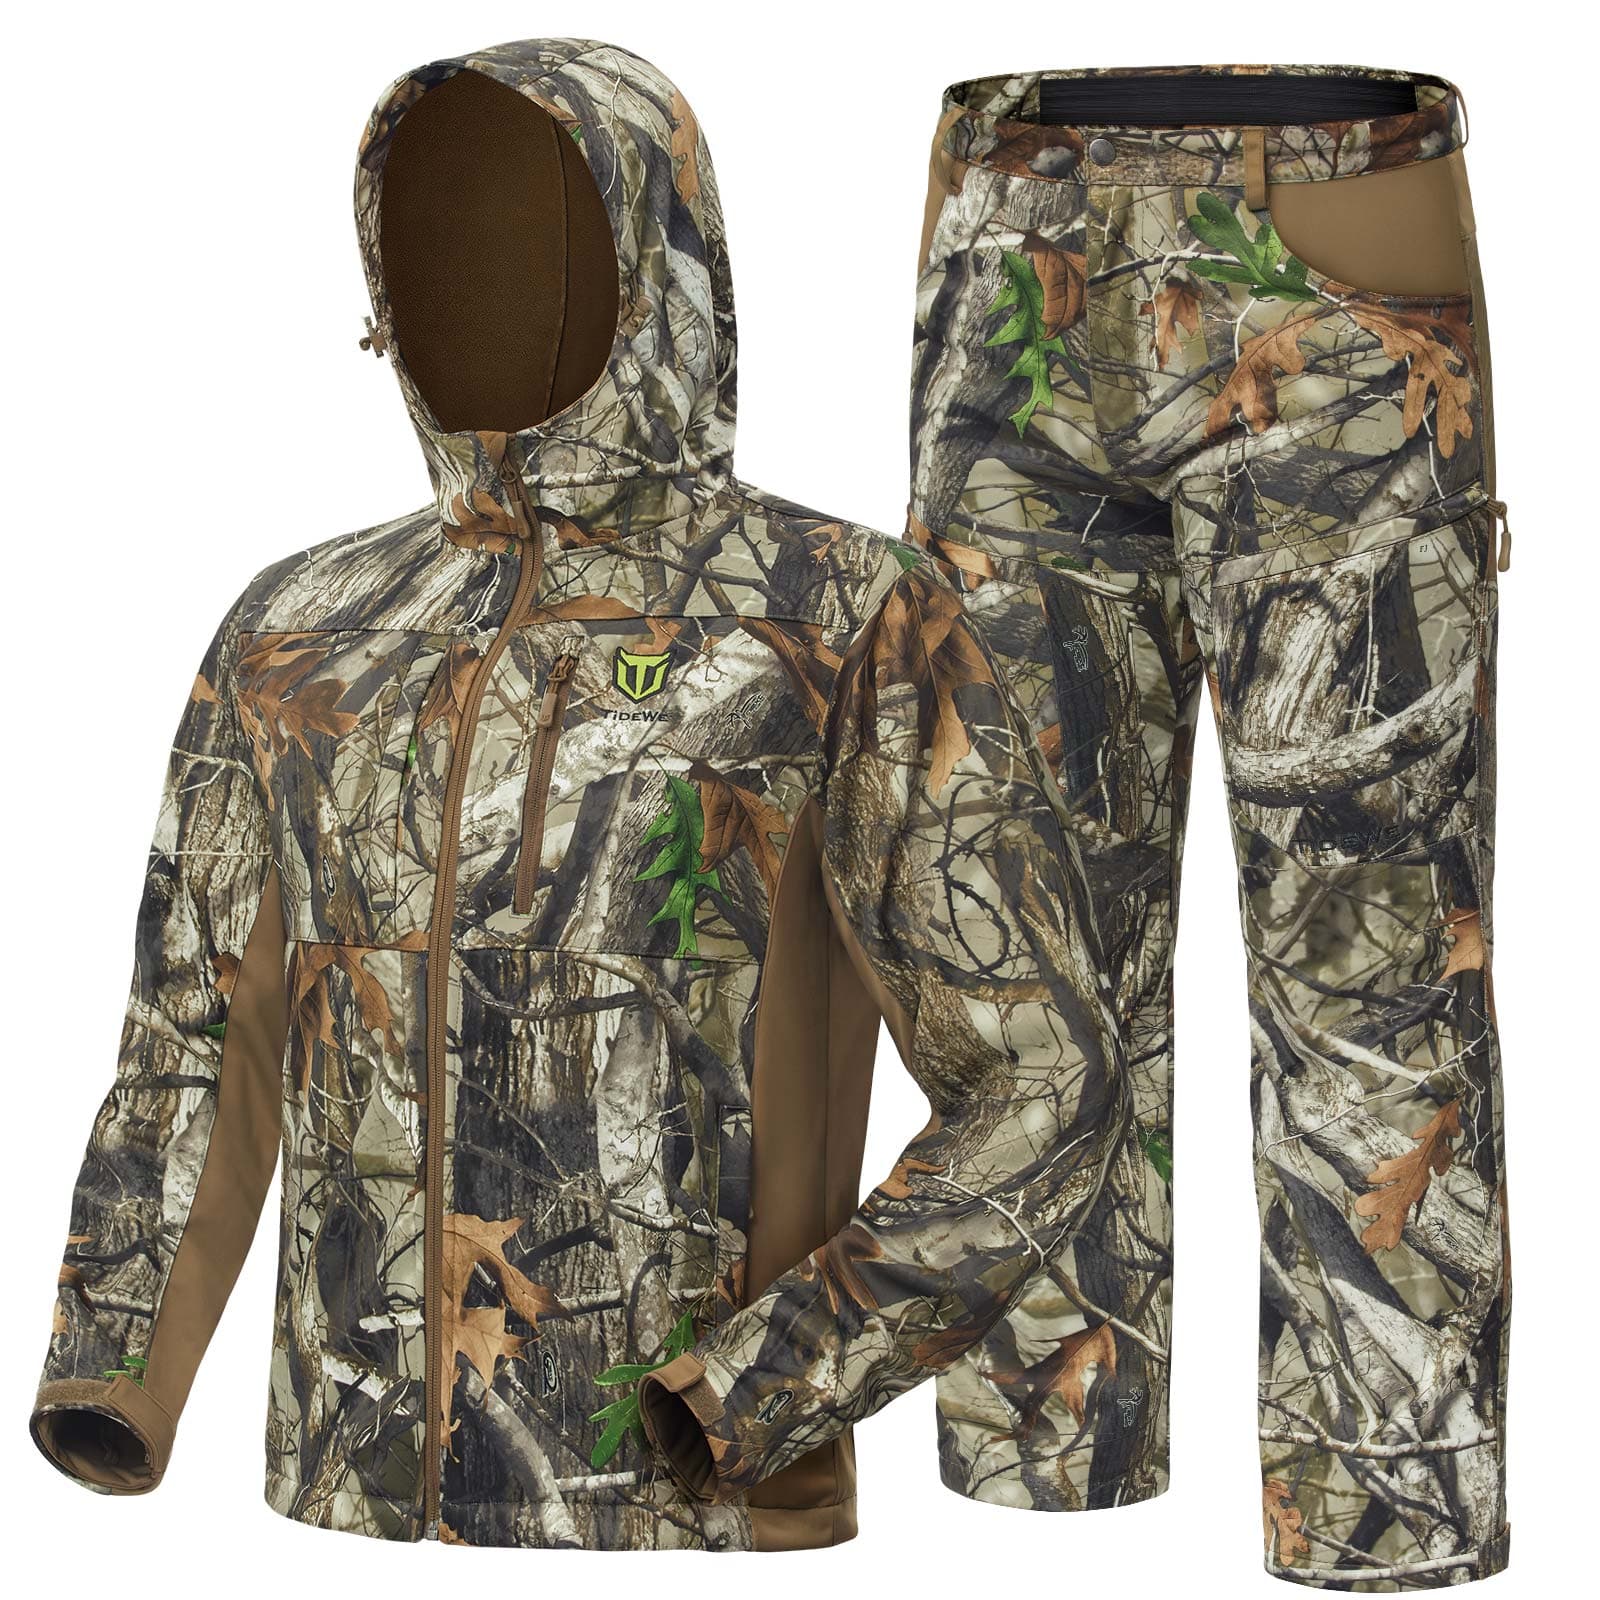 Waterproof Hunting Clothes  Camo Jacket and Pants - Next Camo G2 / L -  TideWe